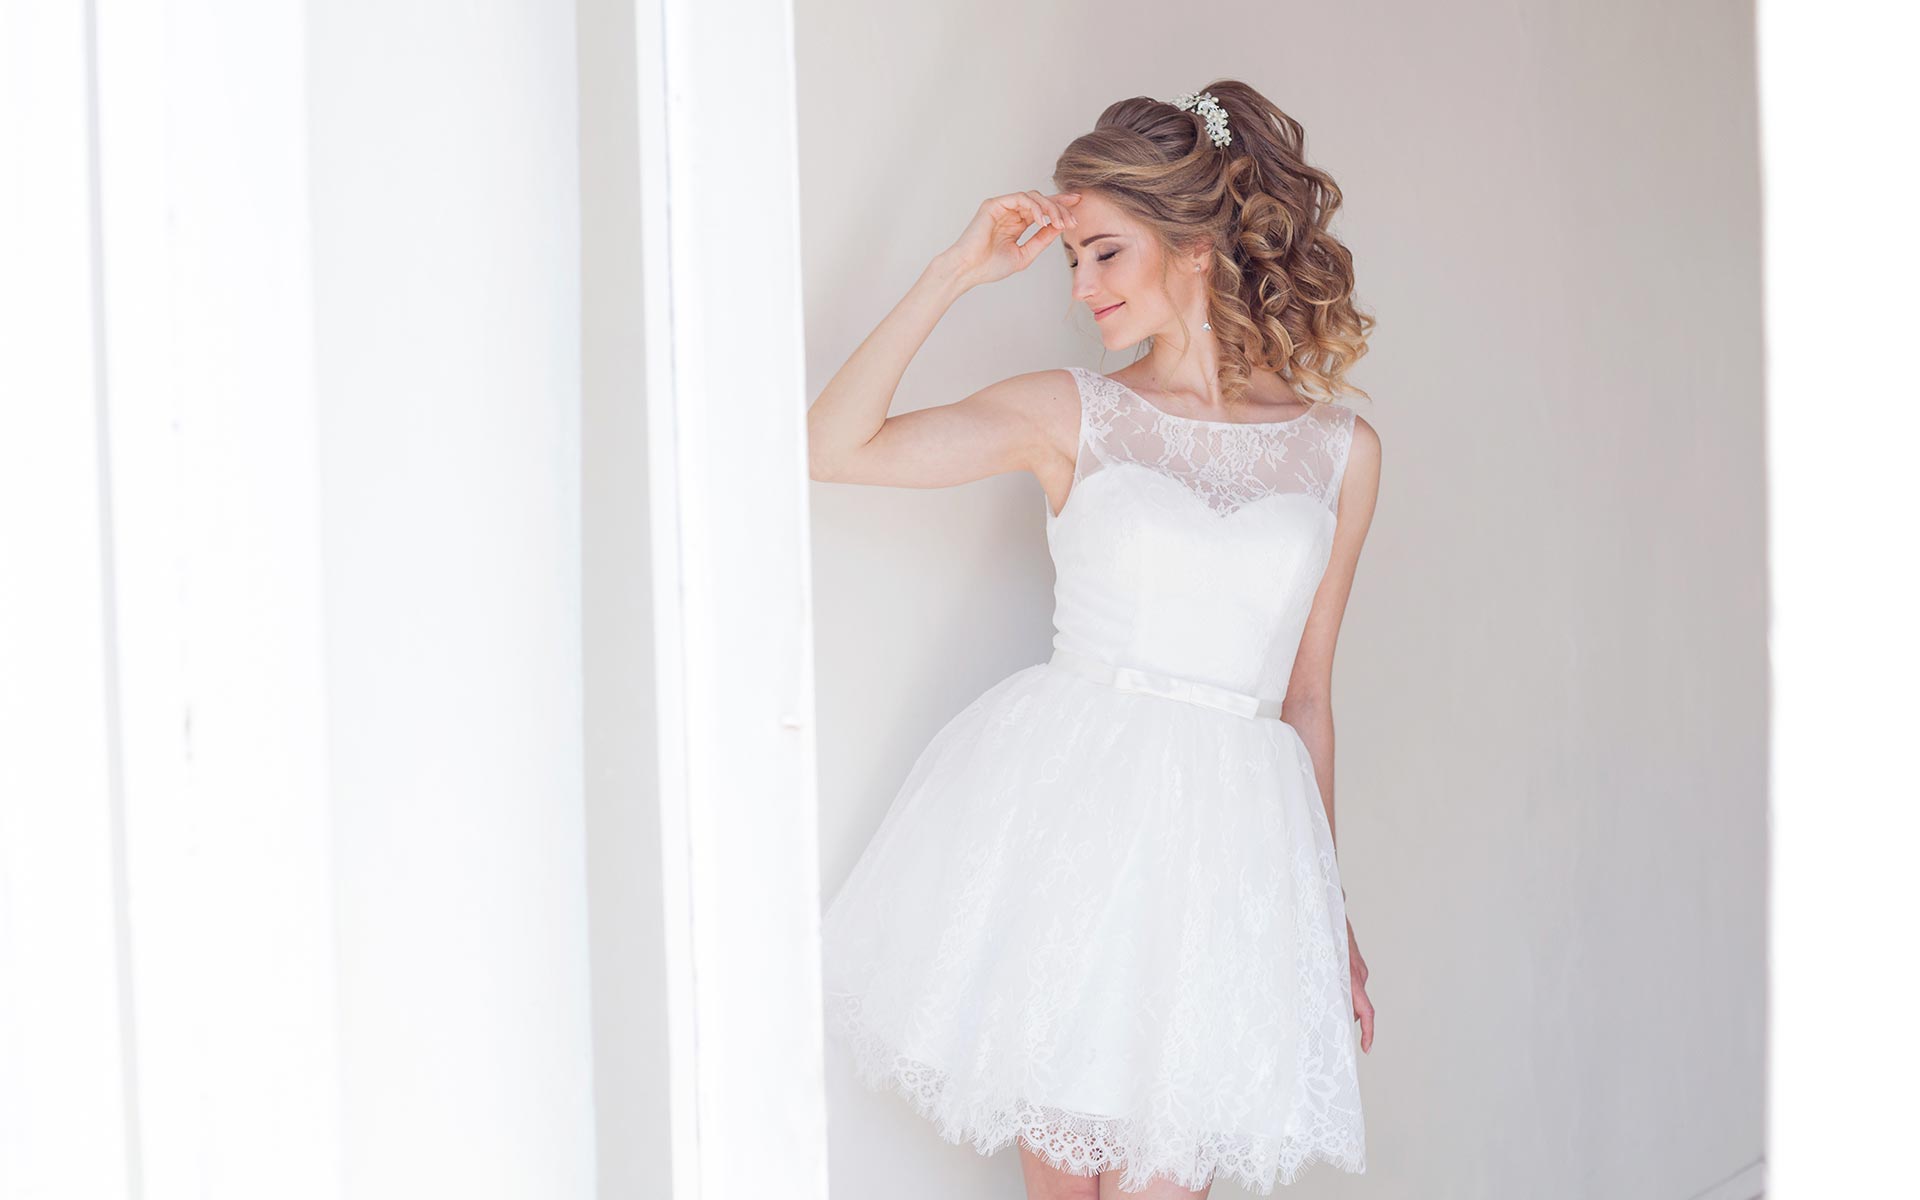 Wedding Dress Trend: Long is out, Short is in